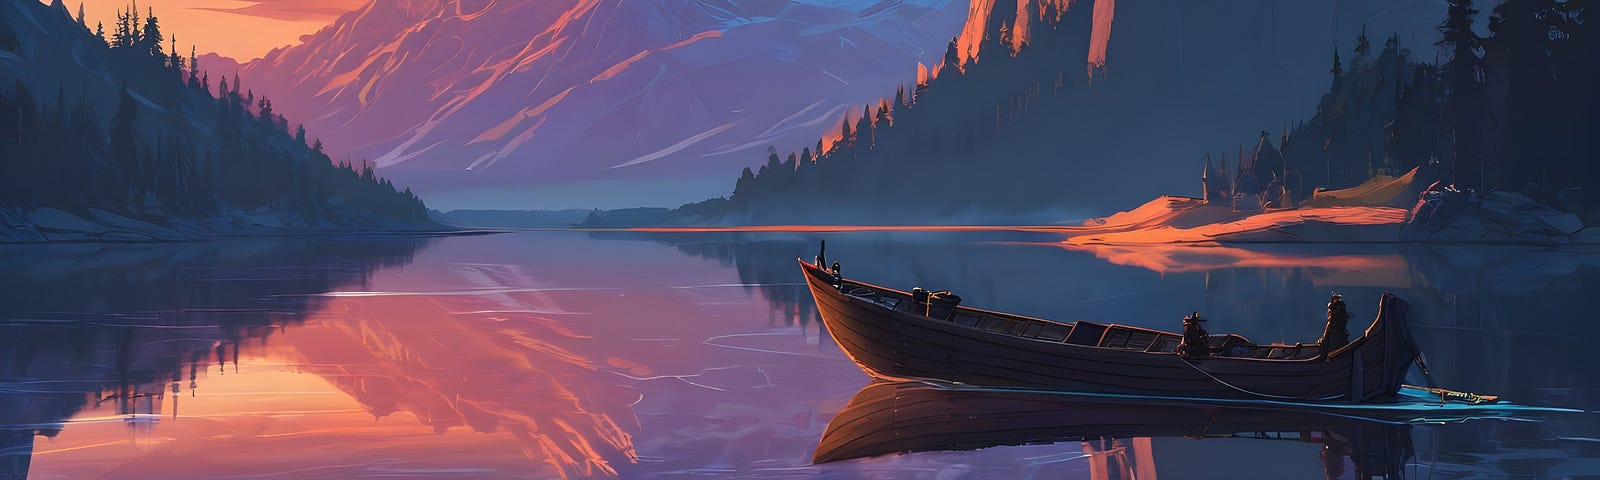 a fishing boat on a lake, fantasy art, dramatic mountains behind, evening